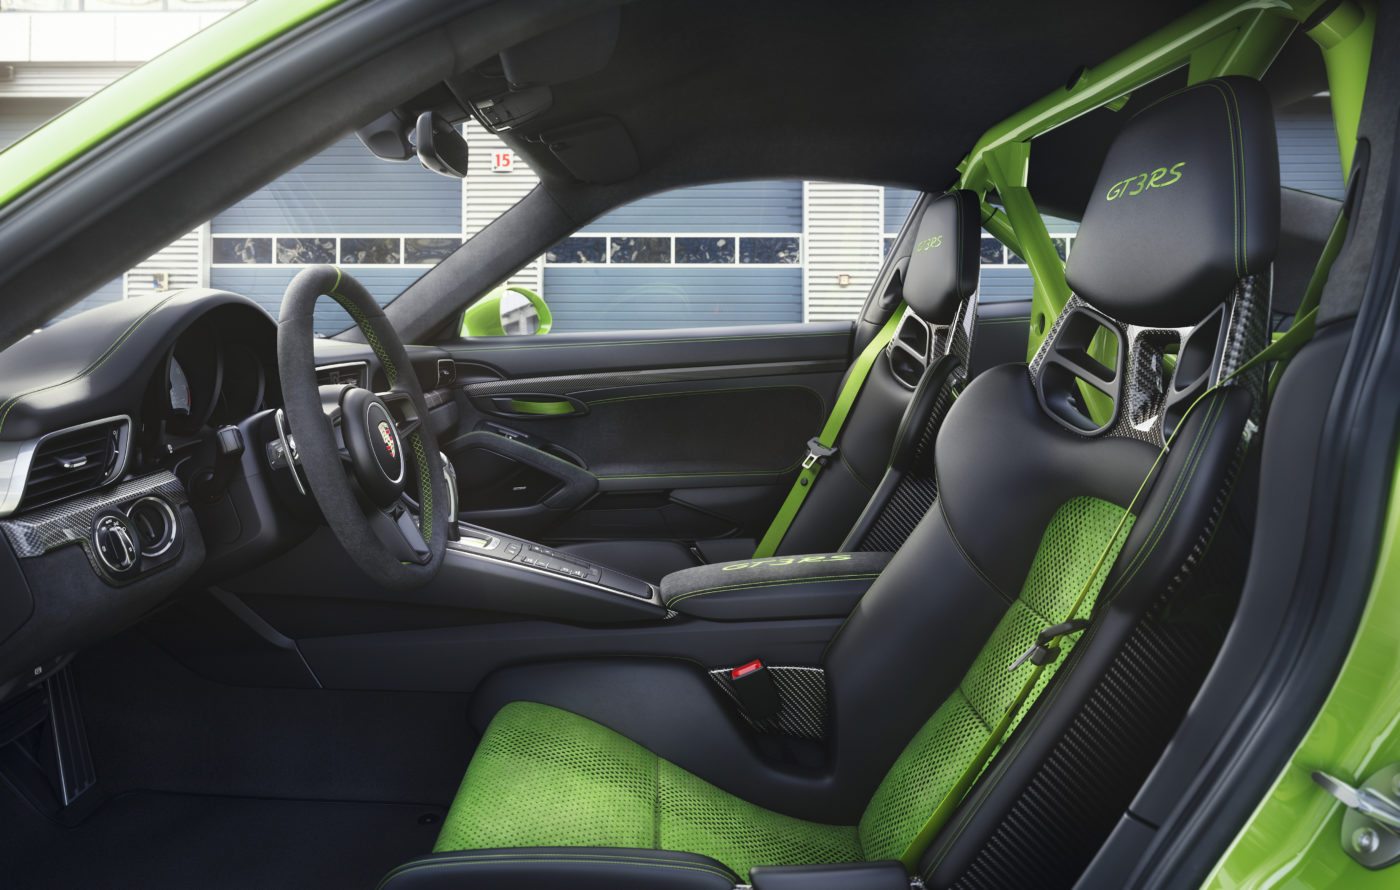 Porsche 911 GT3 RS specs include a roll bar and racing seats